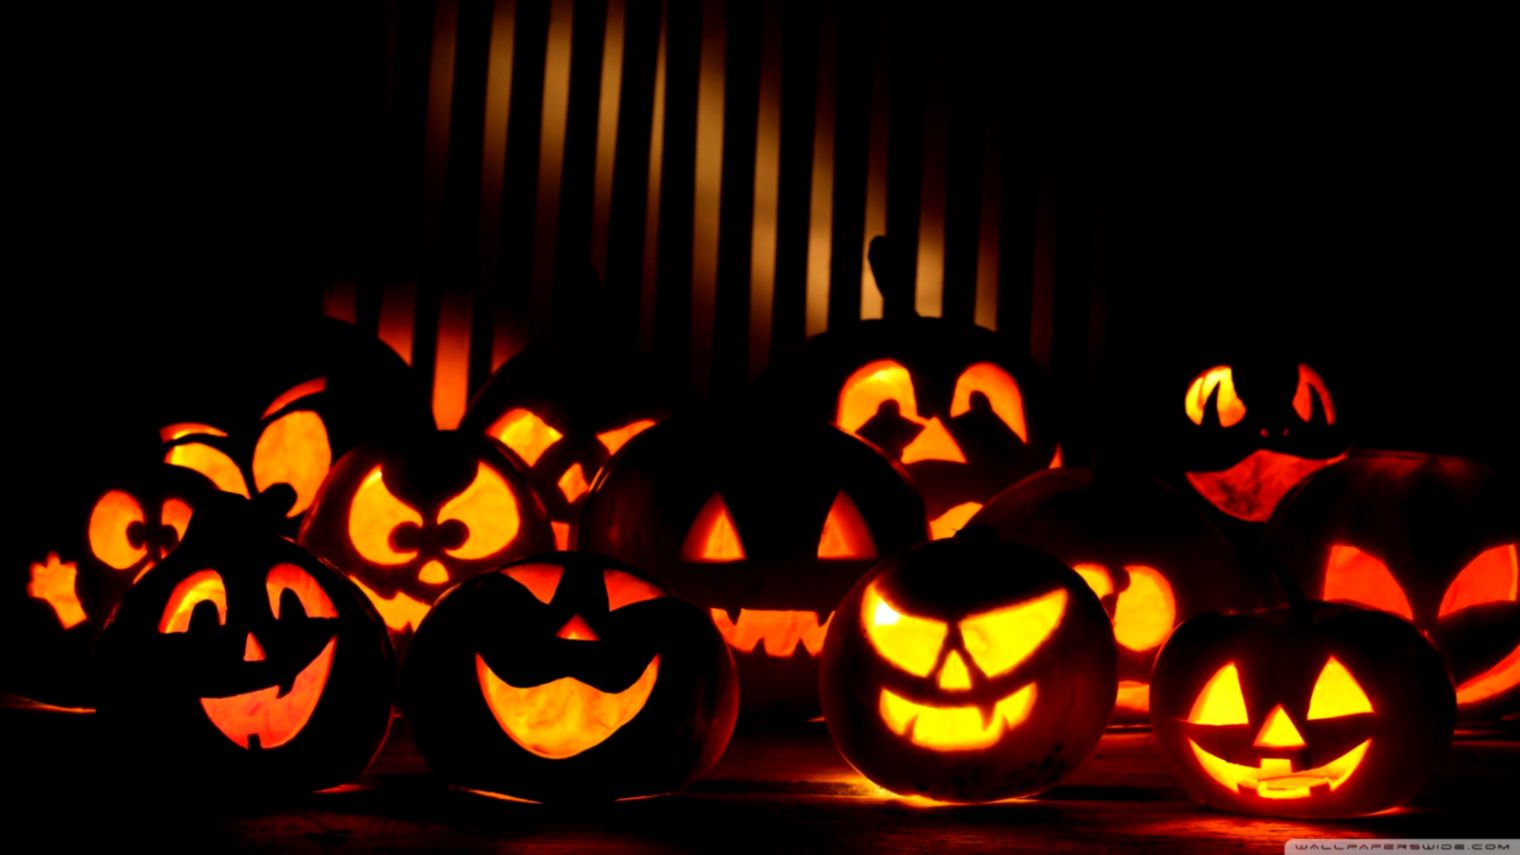 Halloween Wallpaper High Quality For Desktop Wallpapers Themes